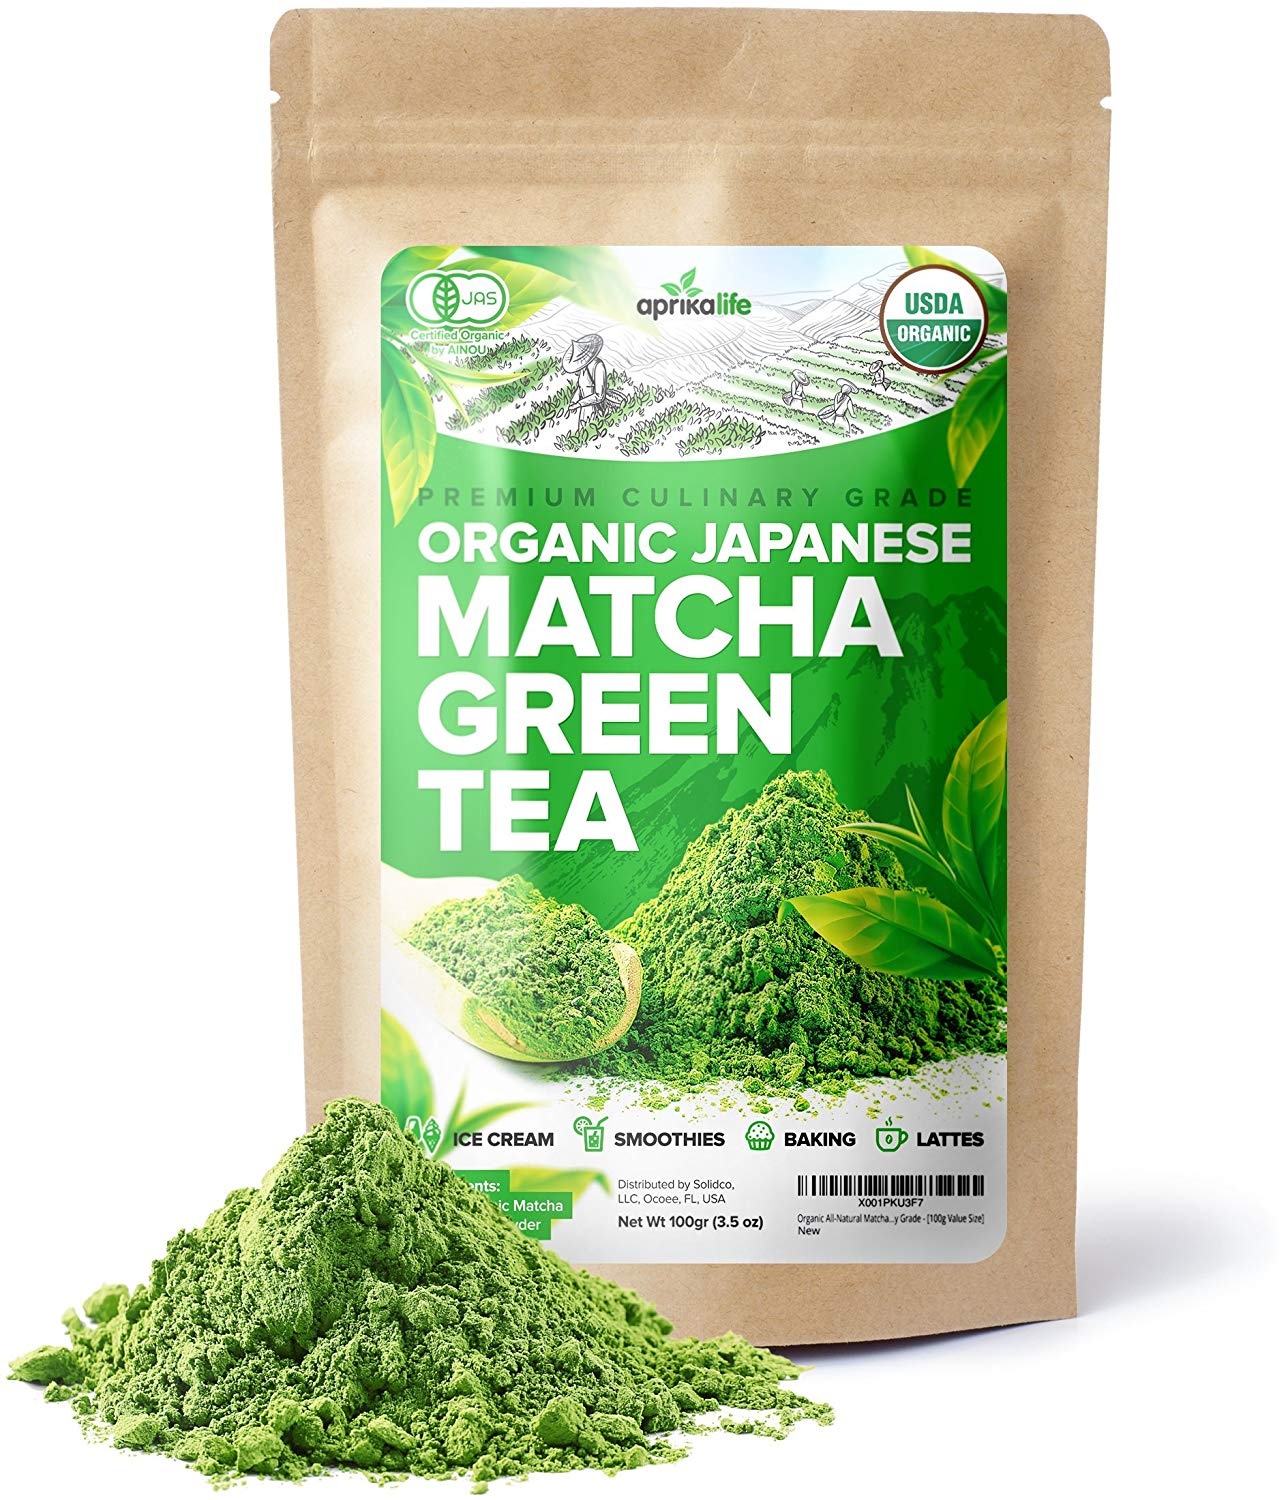 The 10 Best Matcha Powder Teas Available on Amazon in 2020